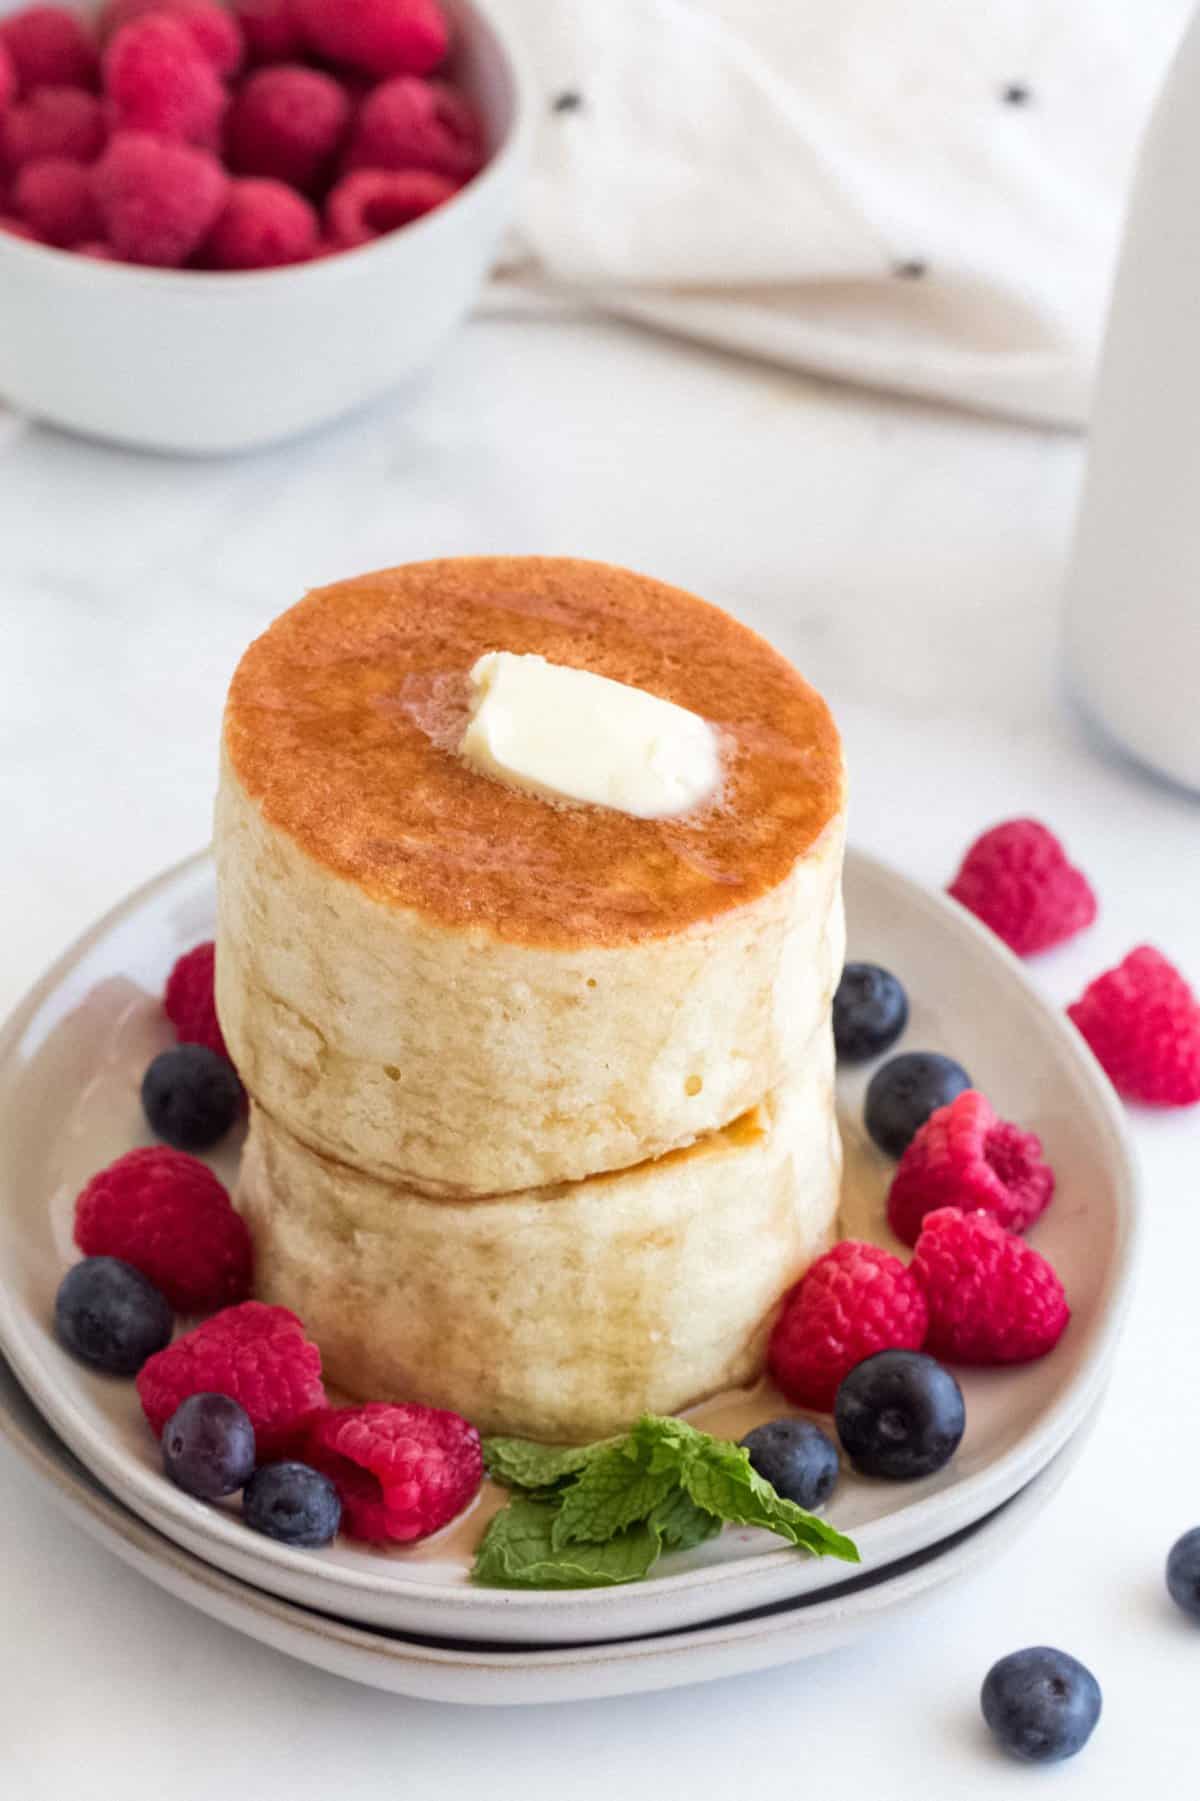 A stack of pancakes on a white plate with berries.